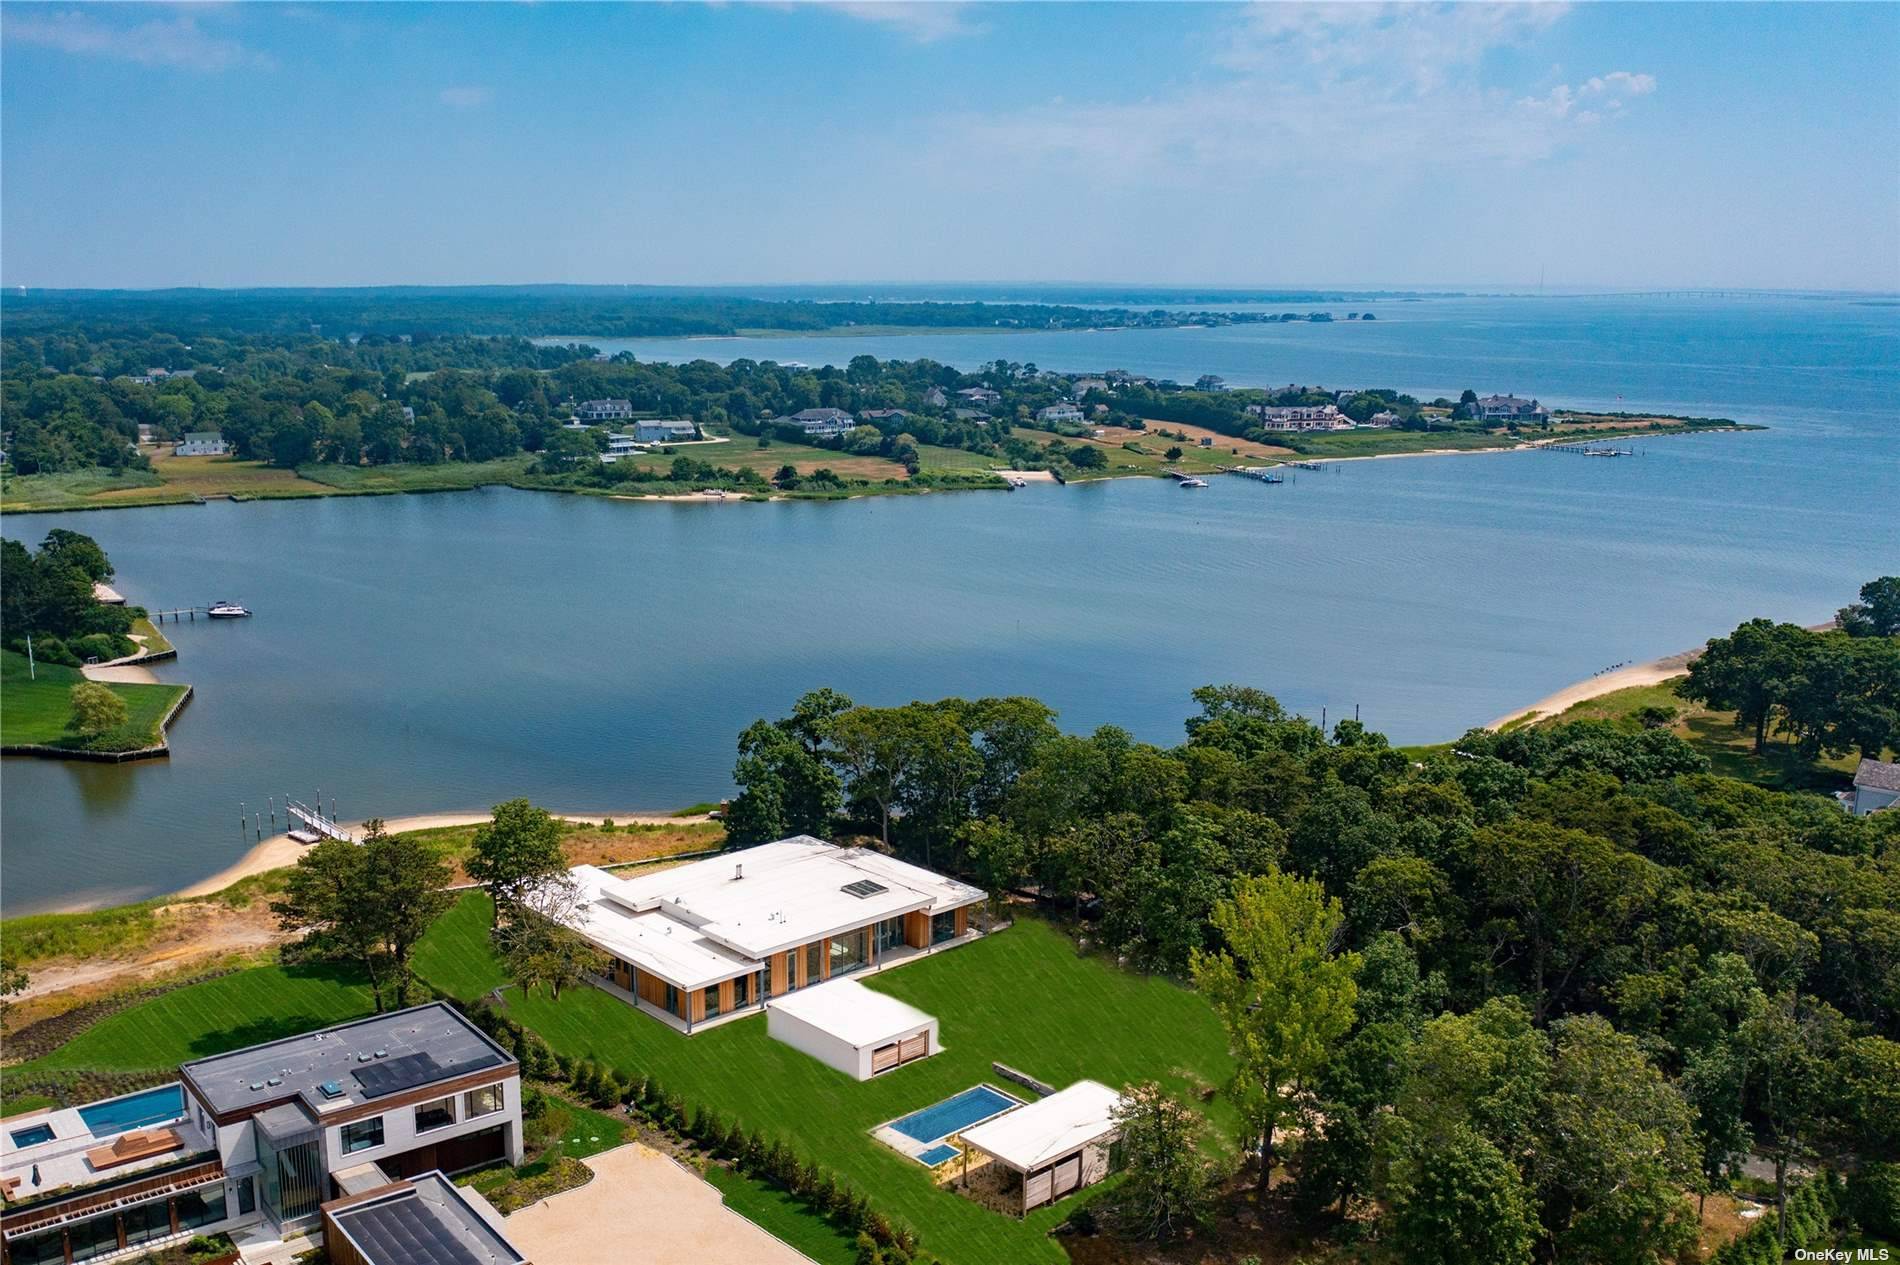 Enjoy high end modern design, single level living and stunning waterfront views in this almost completed new construction featuring a seven bedrooms, pool, spacious cabana and boat dock.